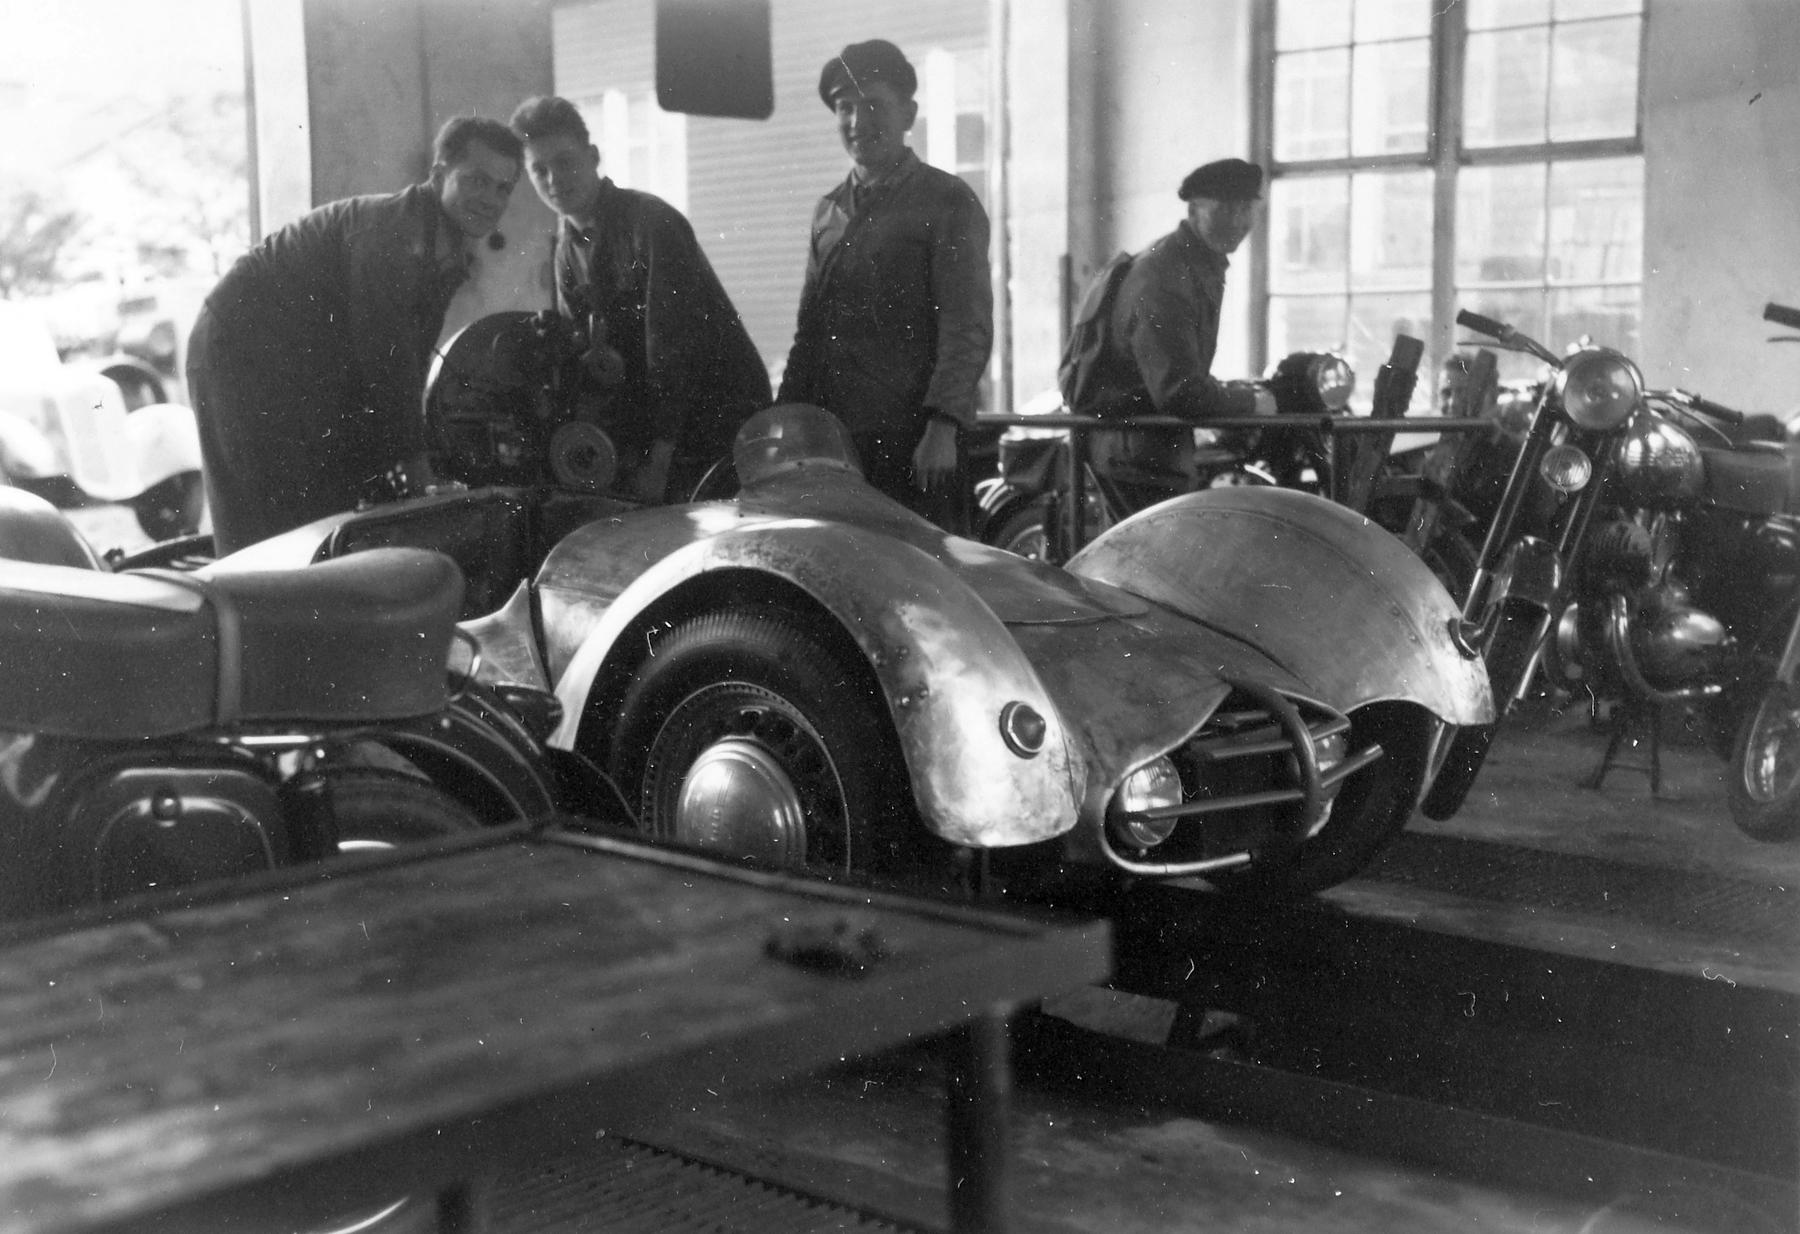 a black and white photo of a car being worked on the chassiss - File:Workshop, motorcycle, worker, a